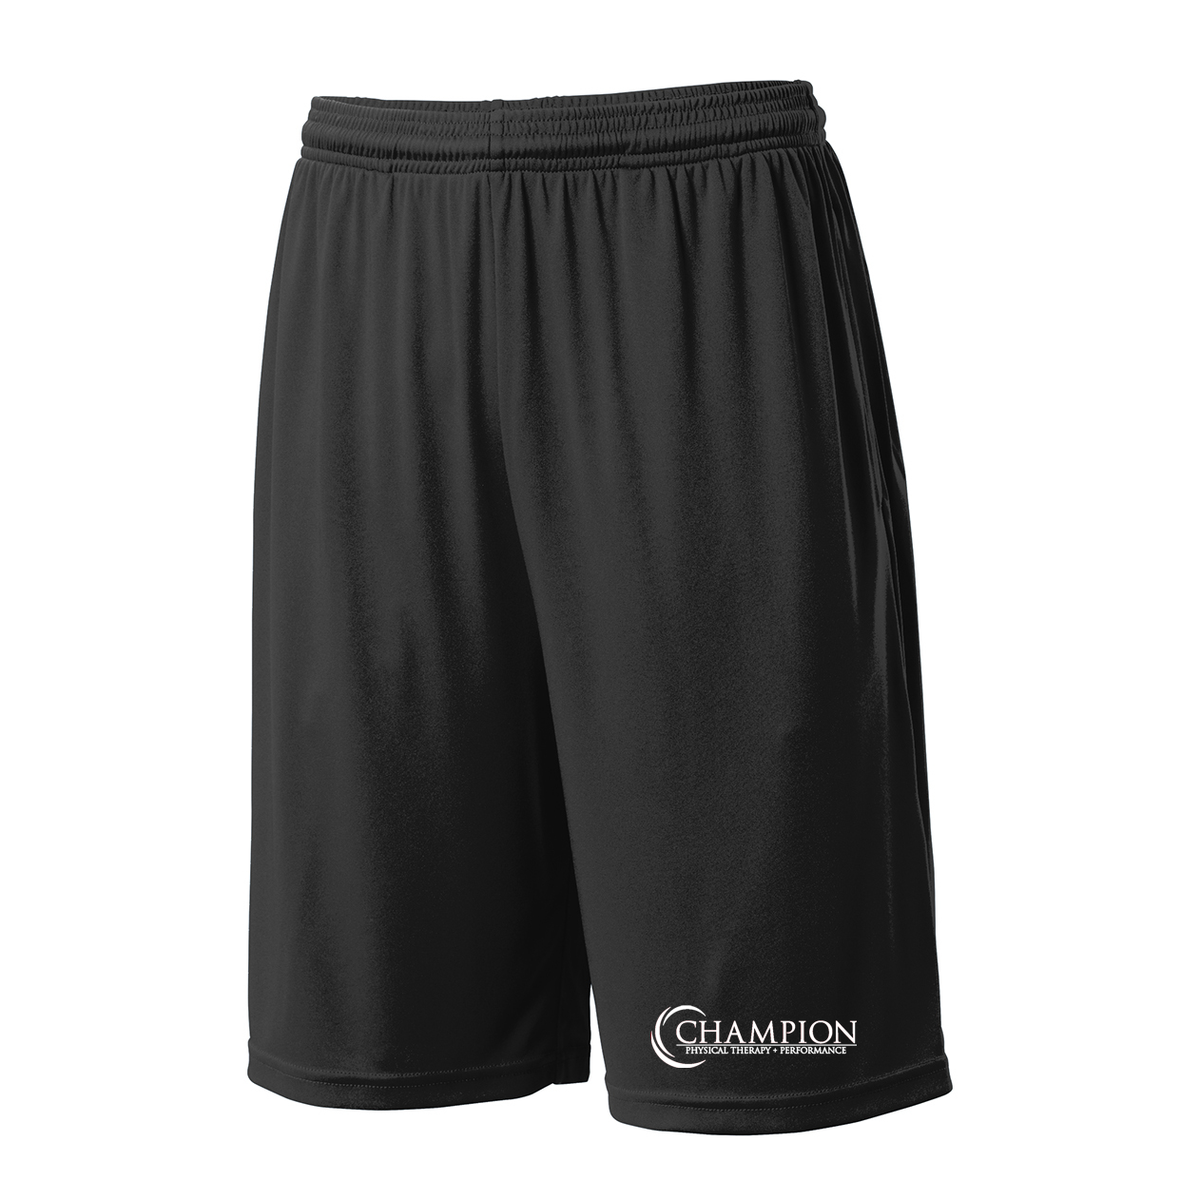 Champion Physical Therapy Shorts